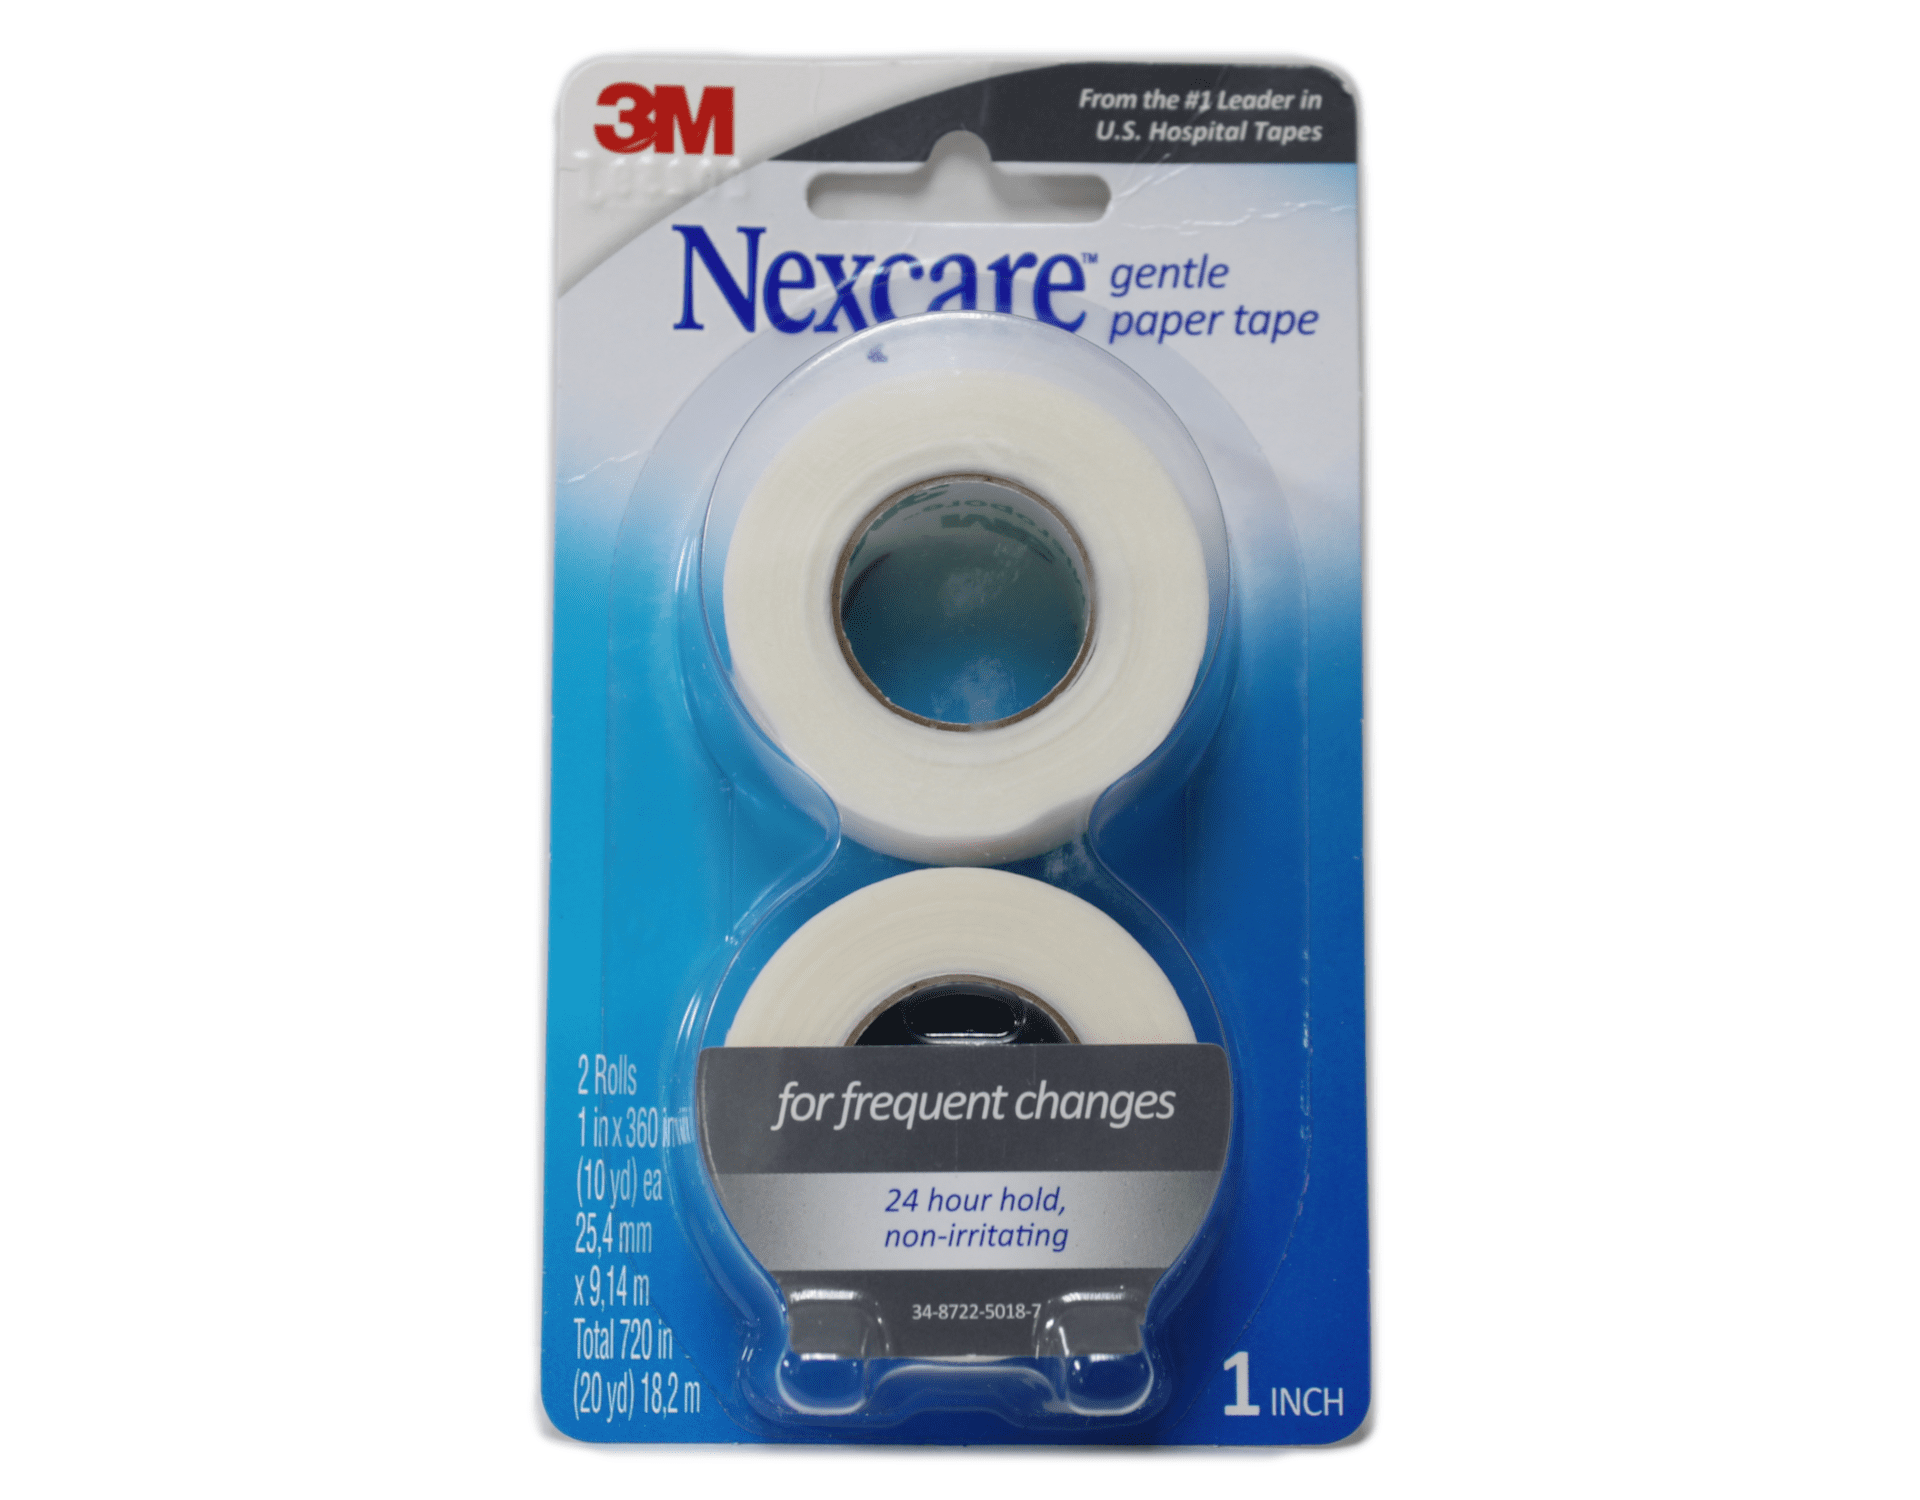 Nexcare Gentle Paper Tape, Medical Paper Tape, secures Dressings and Lifts Away Gently - 1 in x 10 yds, 6 Rolls of Tape